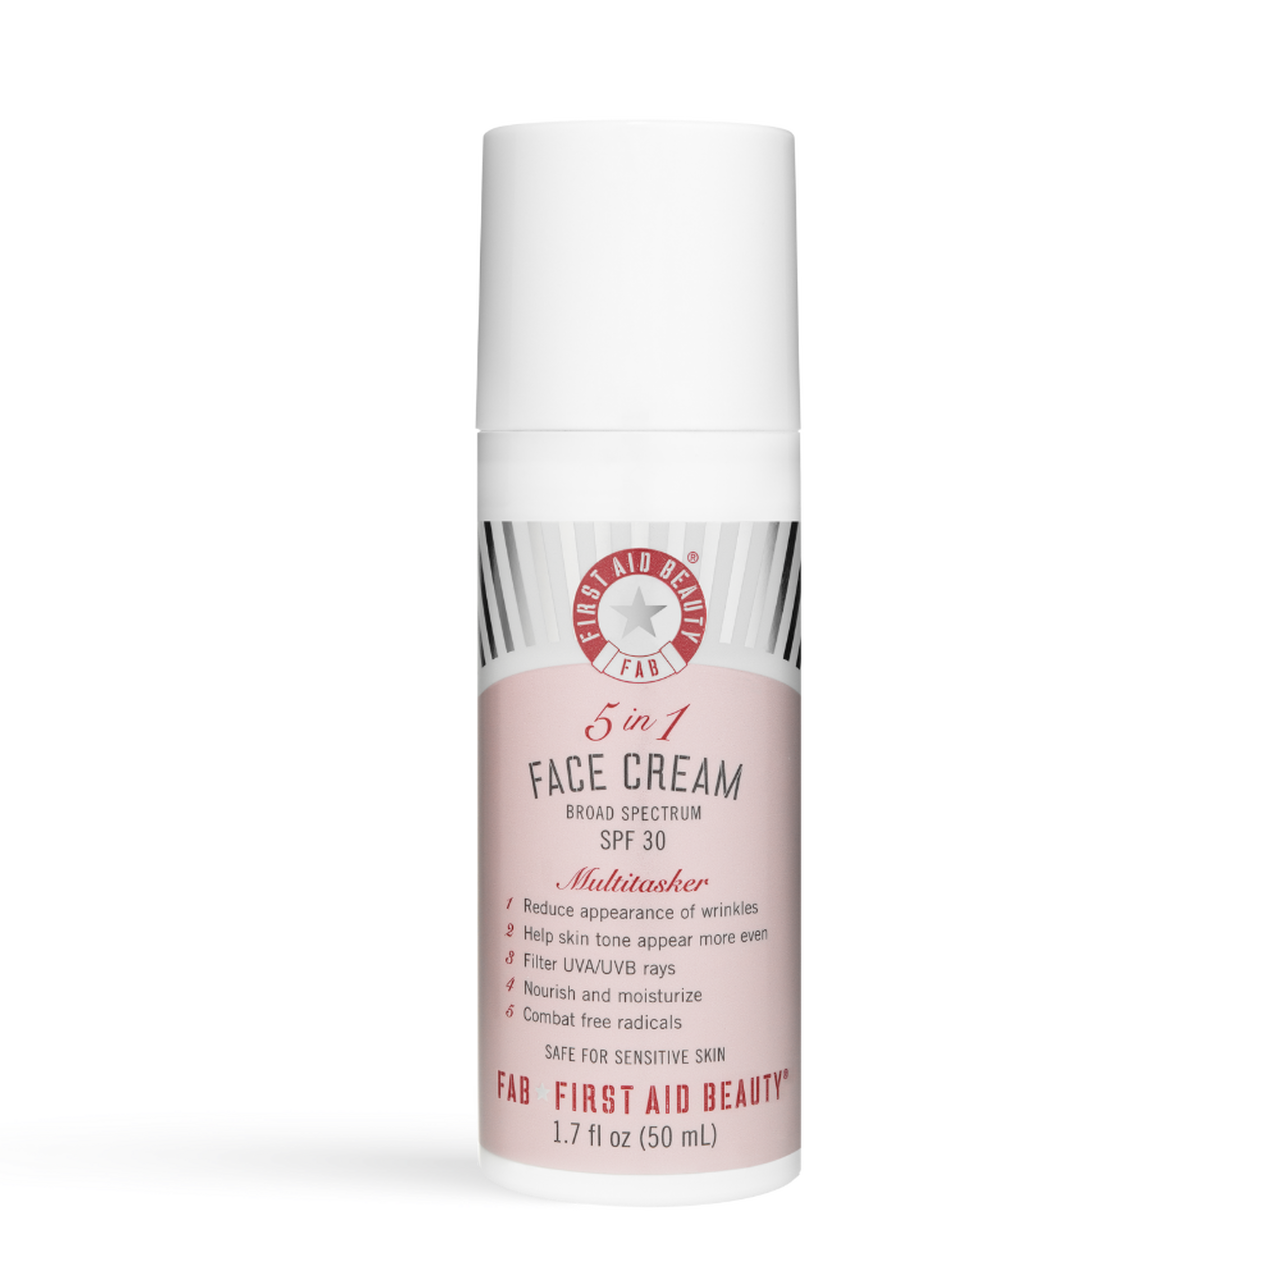 First Aid Beauty 5 In 1 Face Cream SPF 30, 1.7 fl. oz.